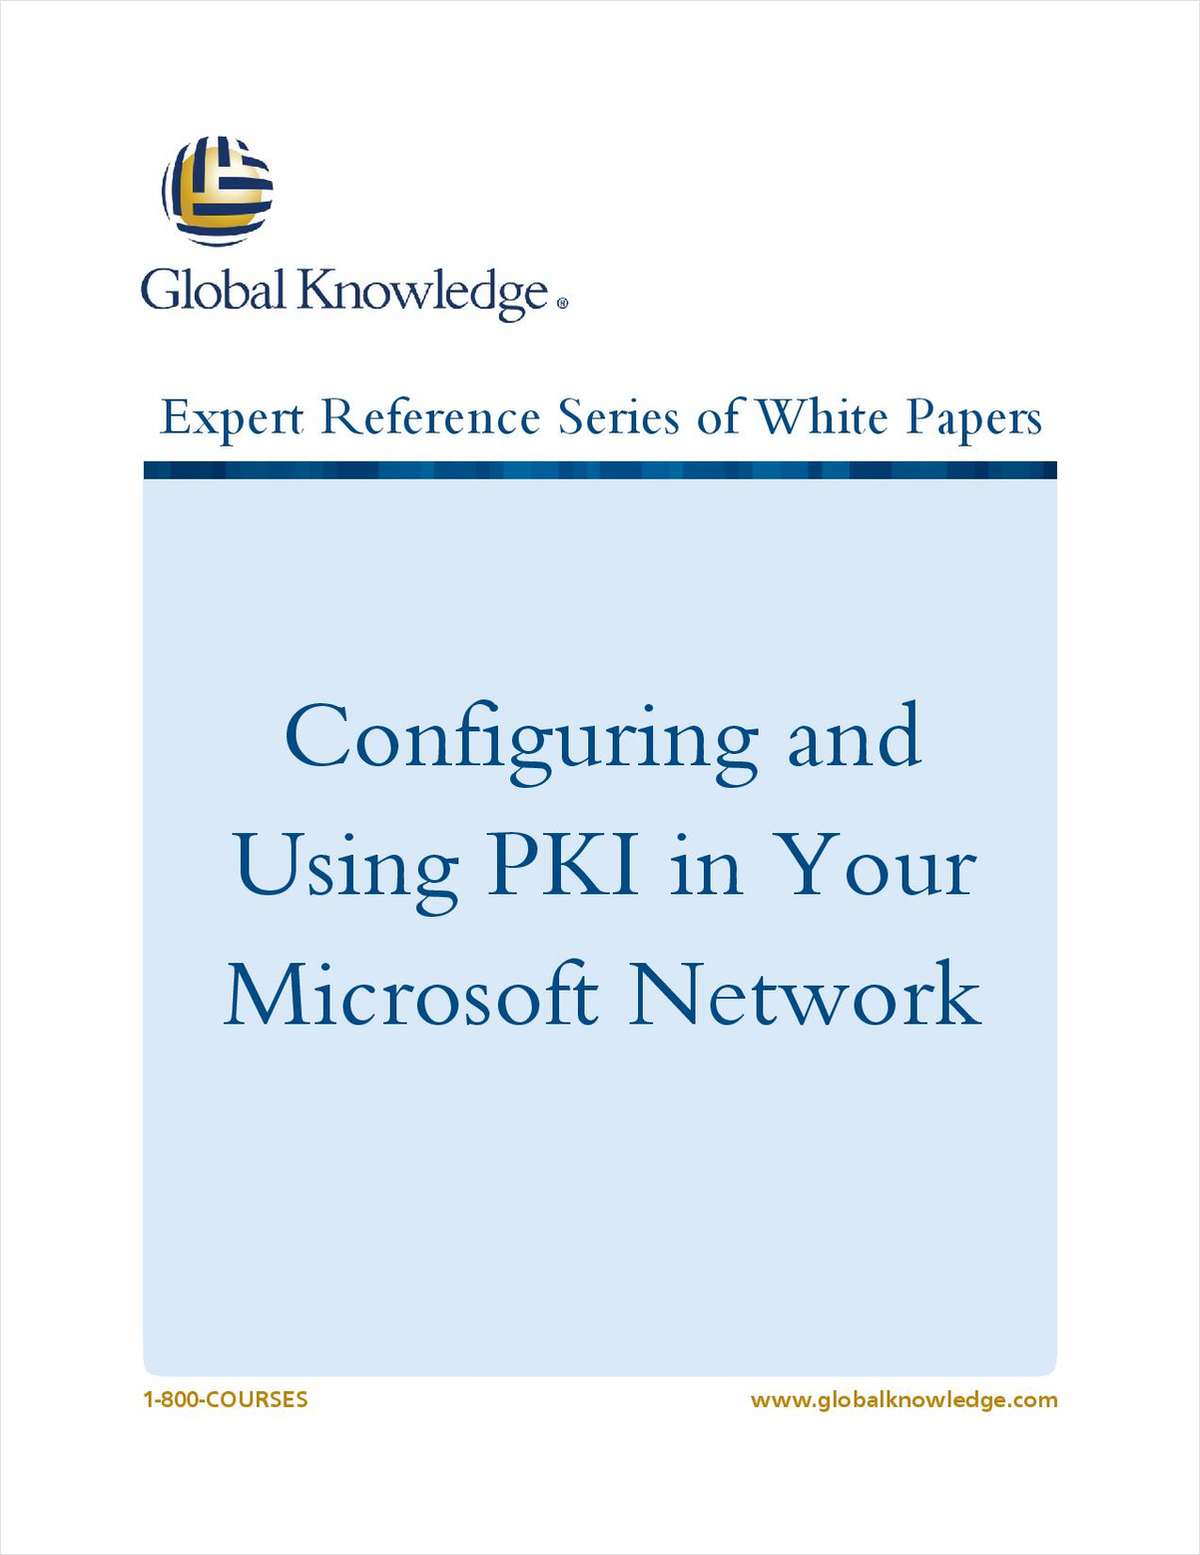 Configuring and Using PKI in Your Microsoft Network